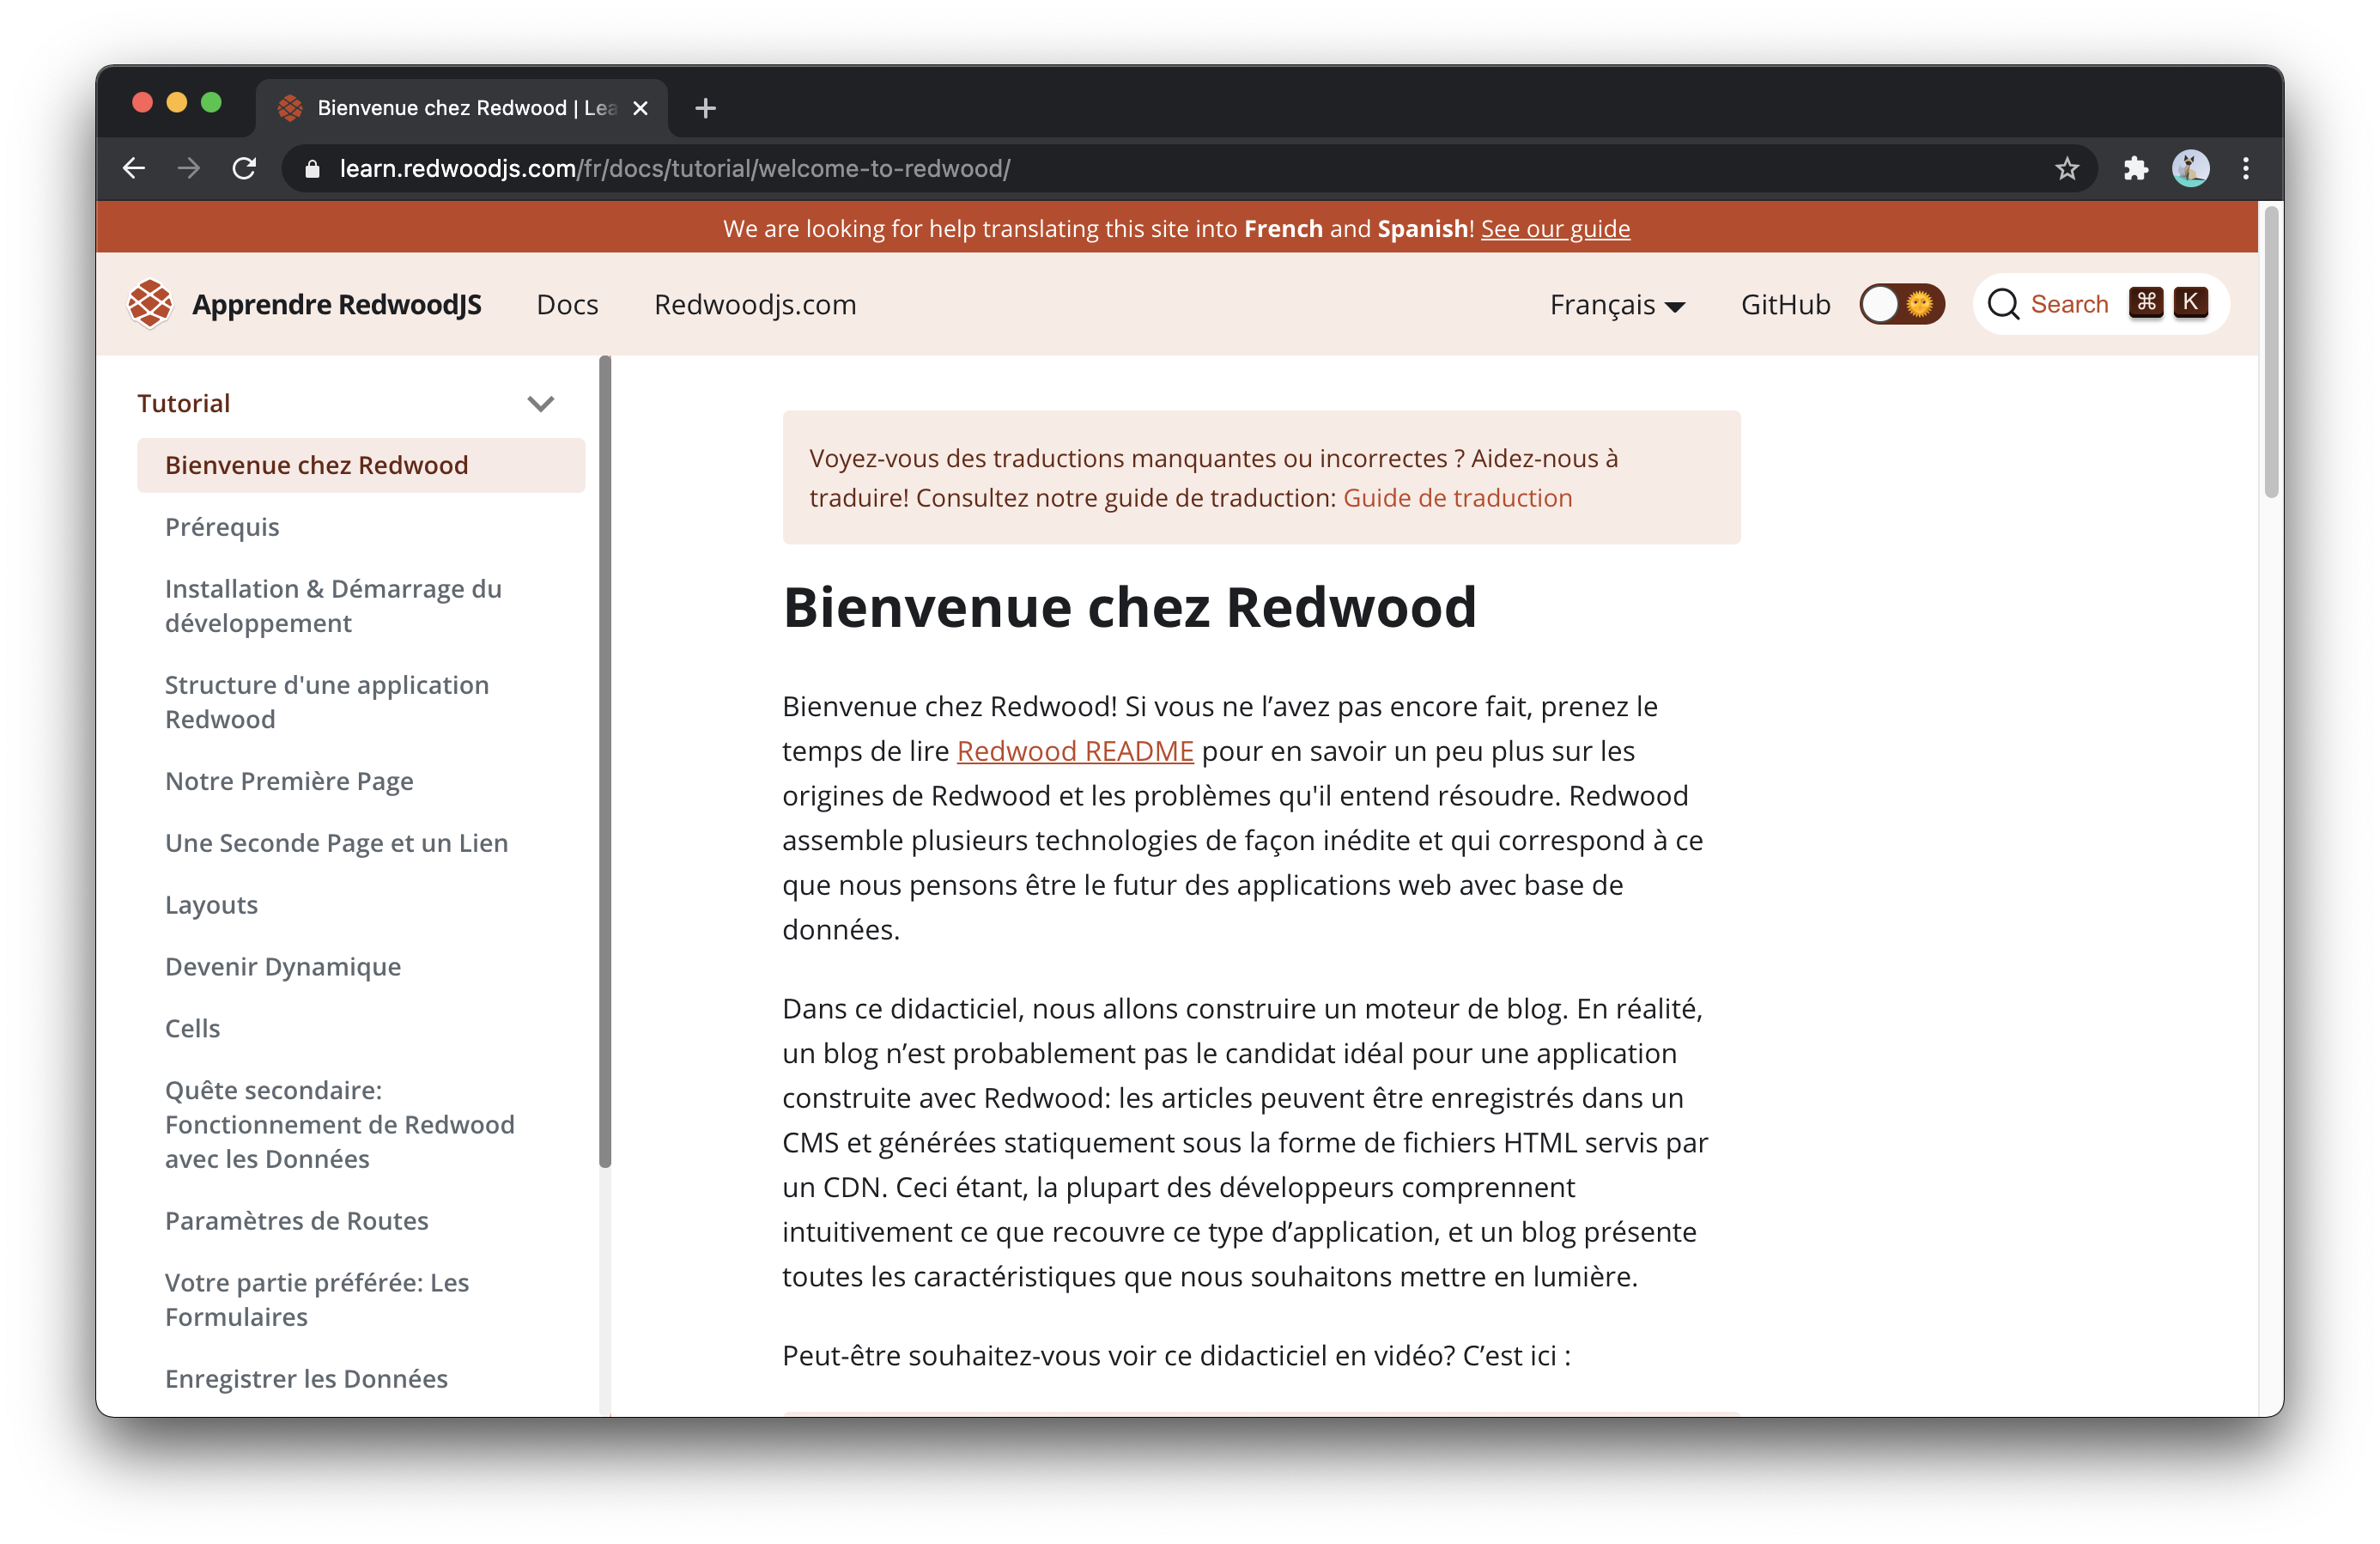 Redwood&#39;s doc page in French